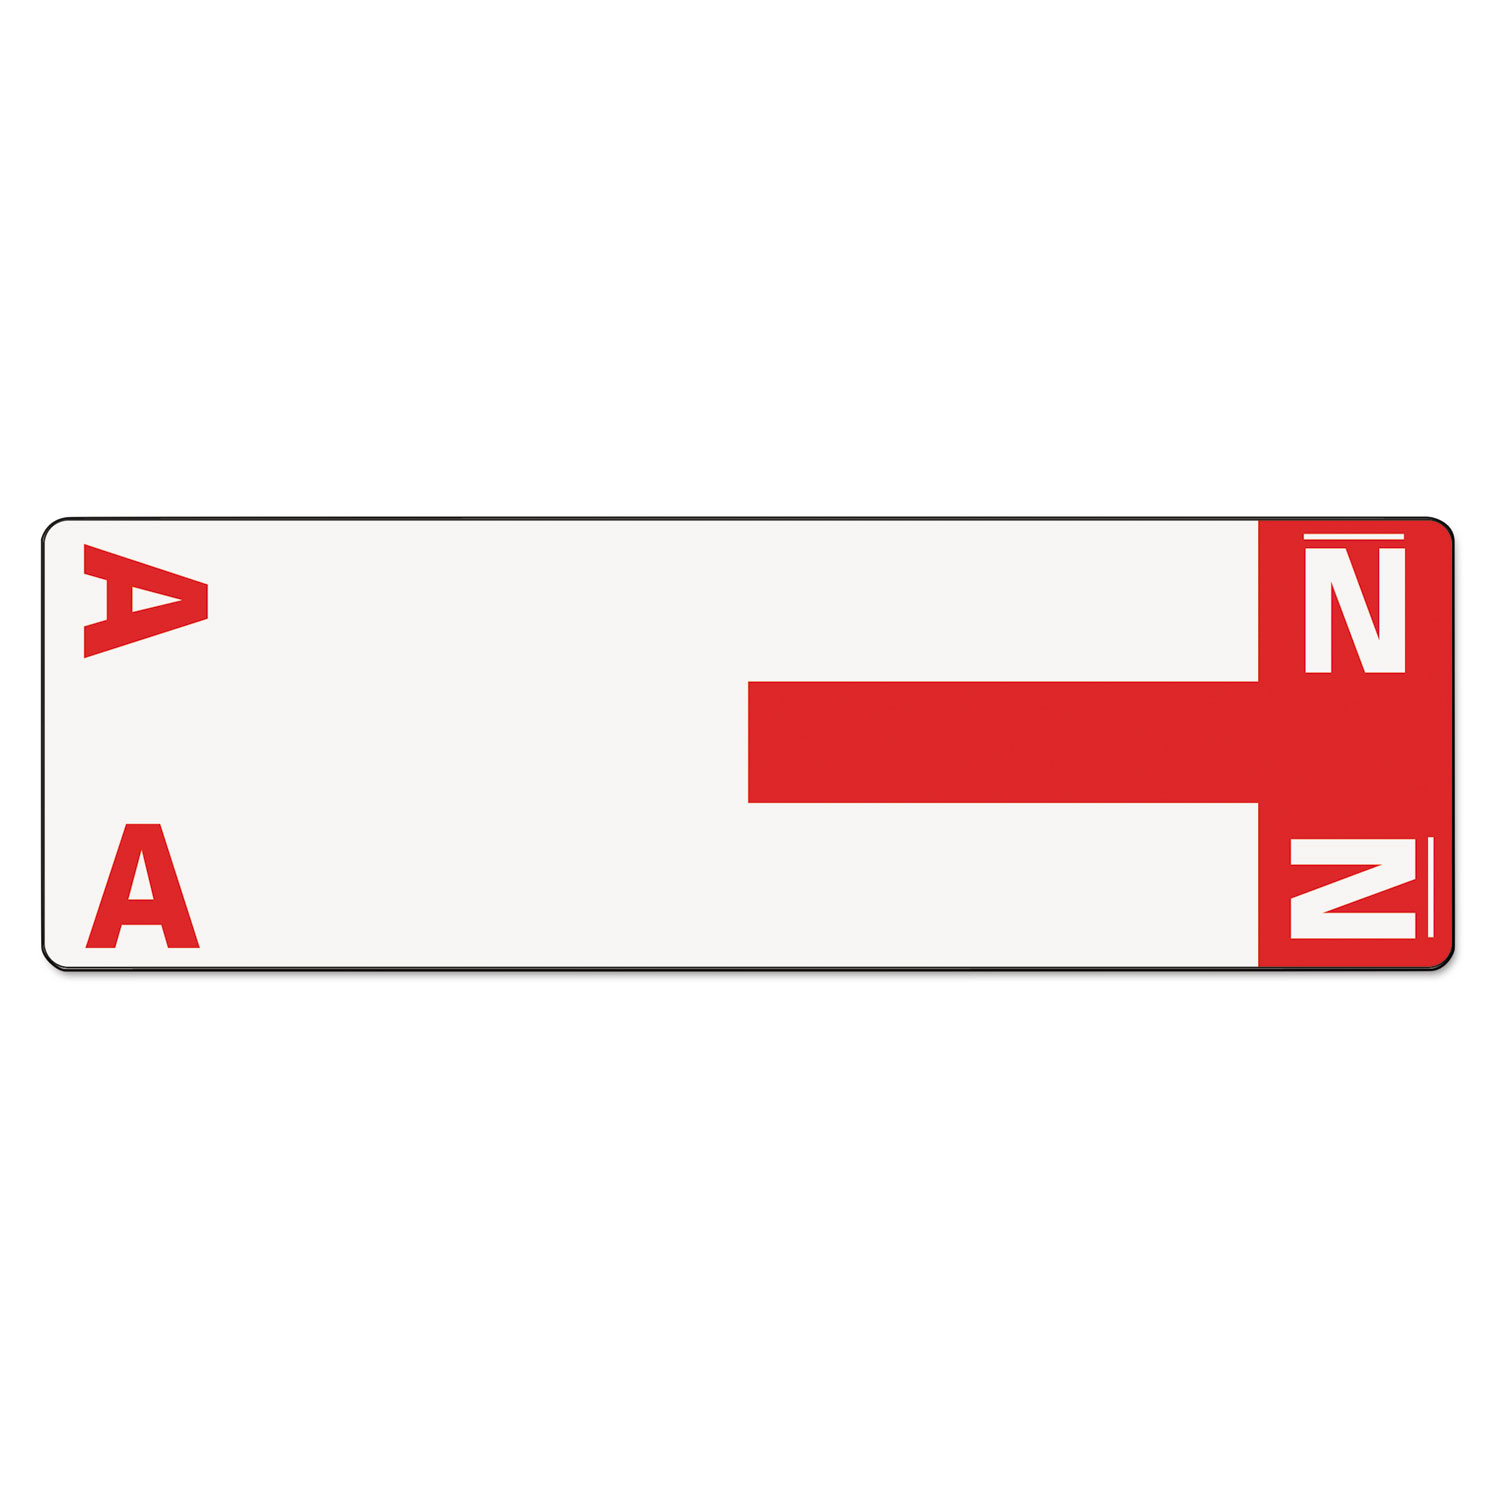  Smead 67152 AlphaZ Color-Coded First Letter Combo Alpha Labels, A/N, 1.16 x 3.63, Red/White, 5/Sheet, 20 Sheets/Pack (SMD67152) 